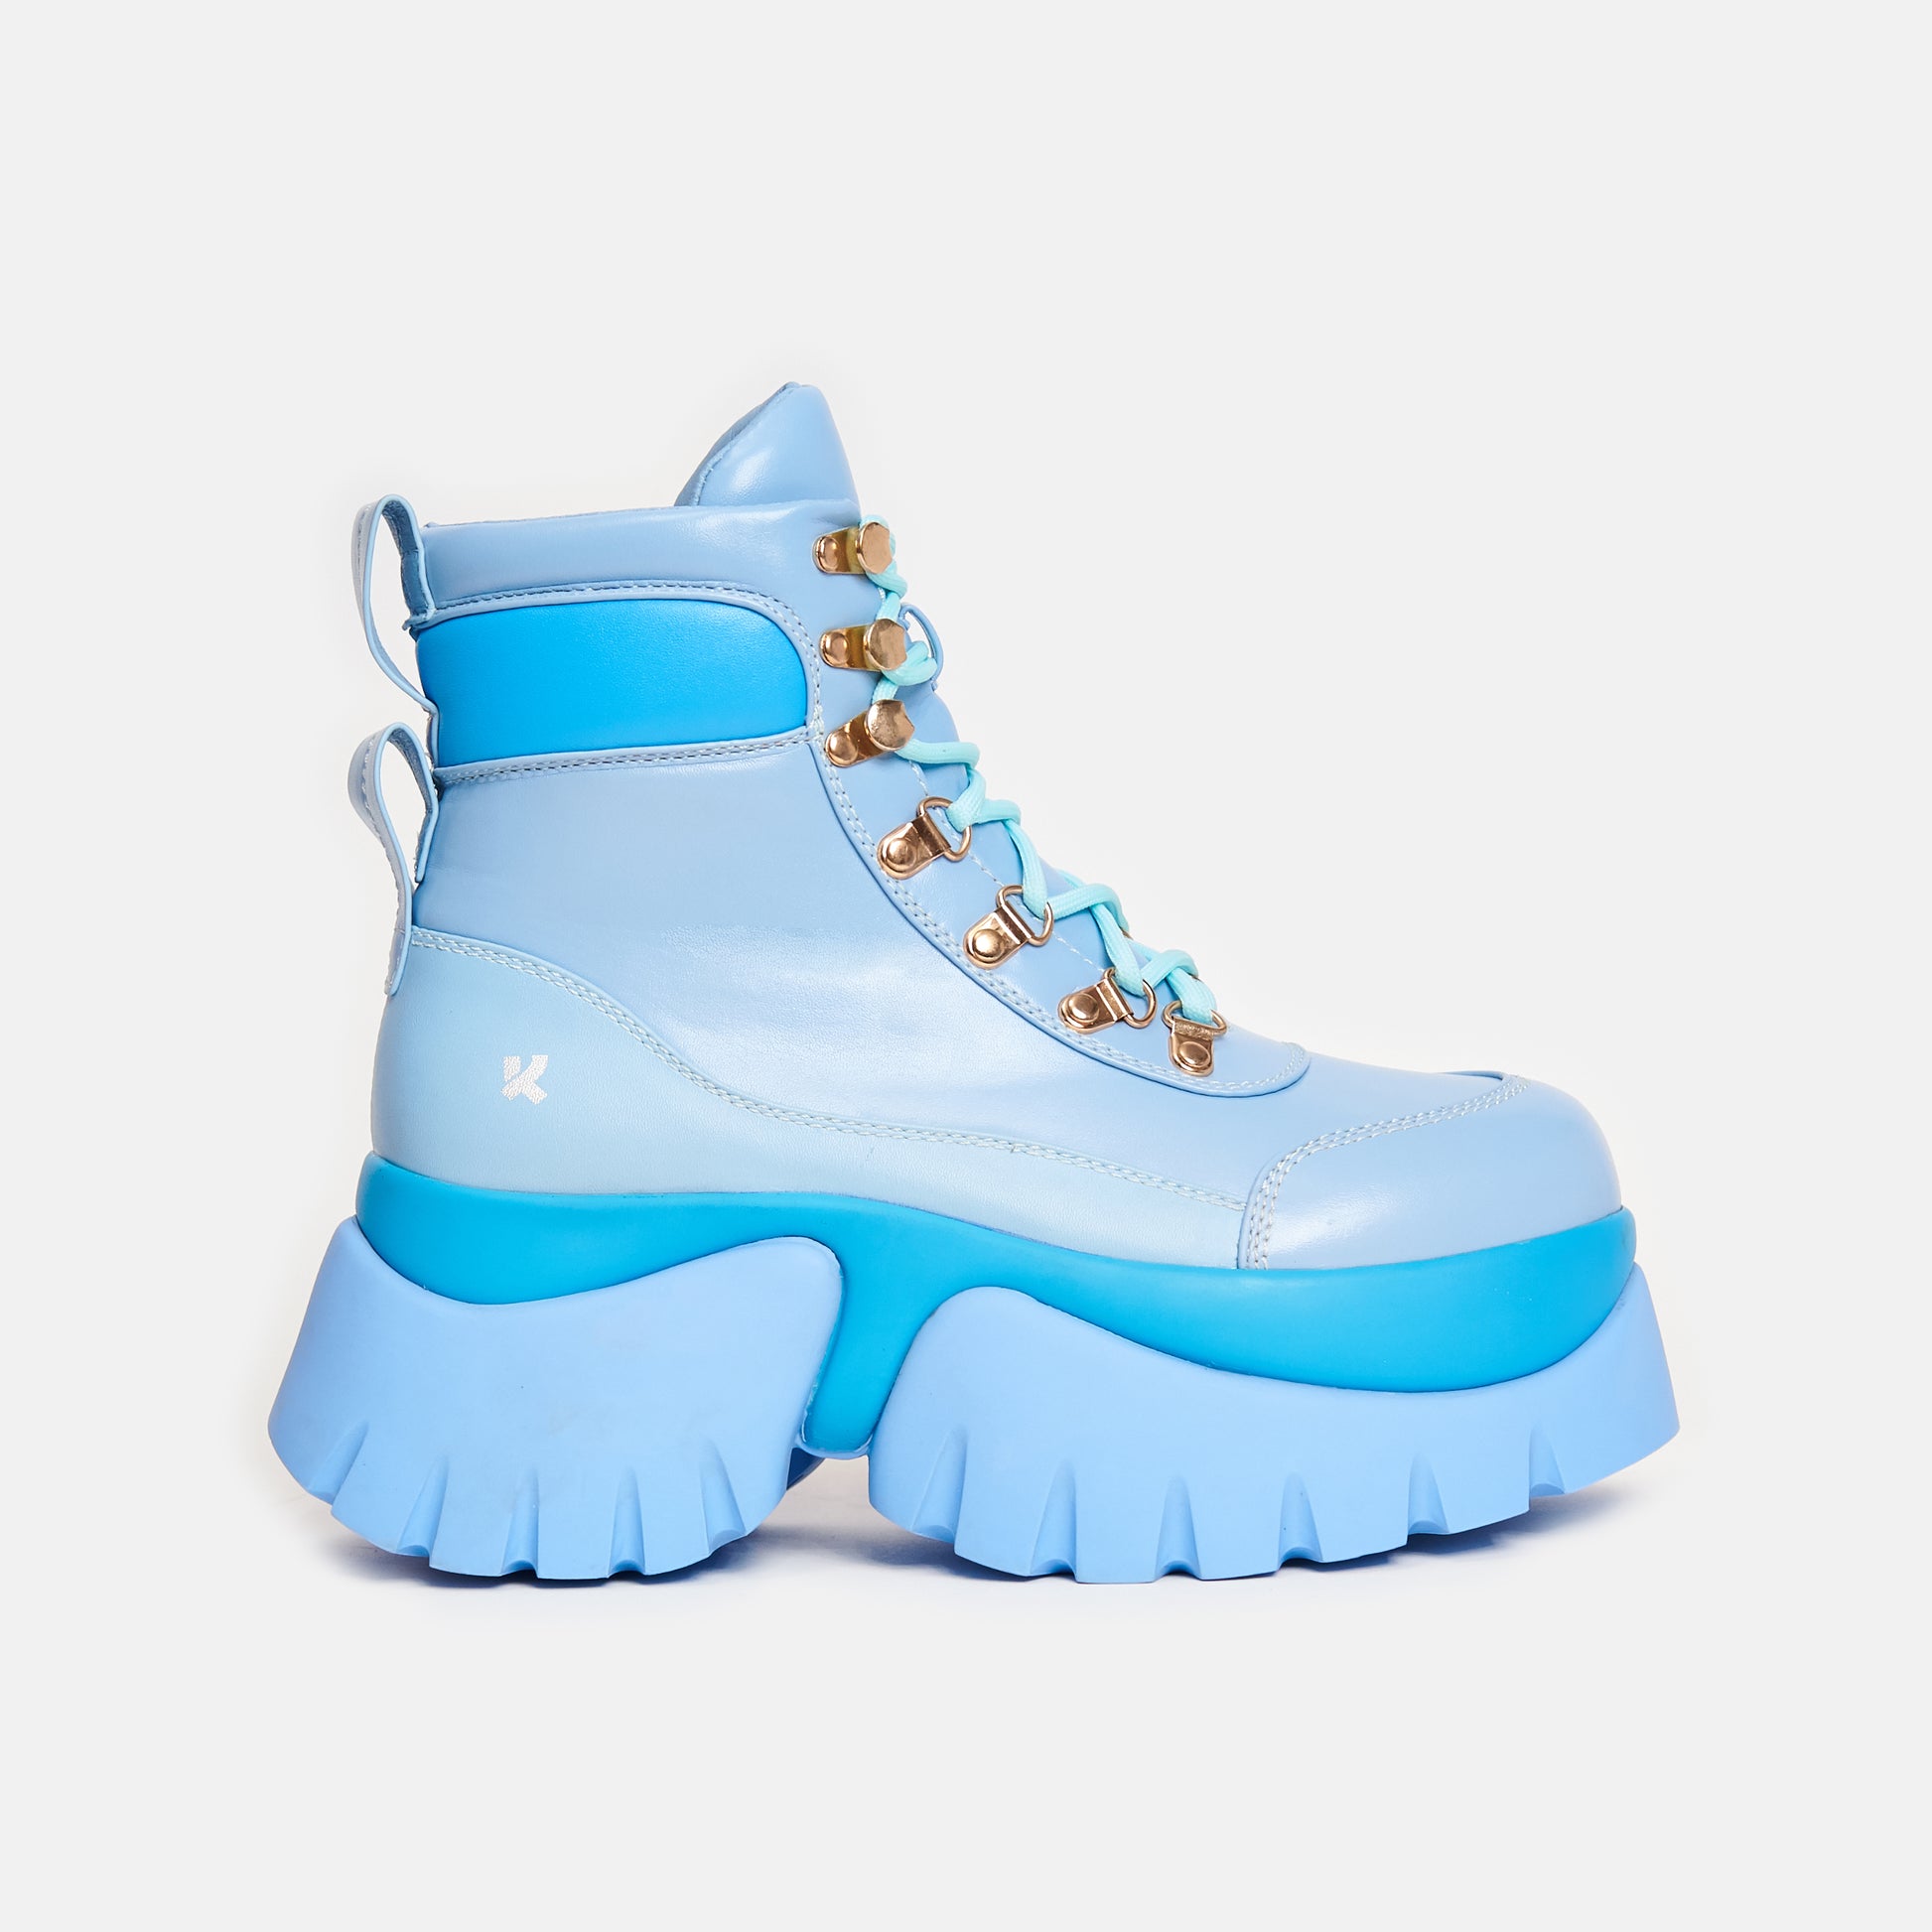 Crybaby Blue Vilun Platform Boots - Ankle Boots - KOI Footwear - Blue - Side View